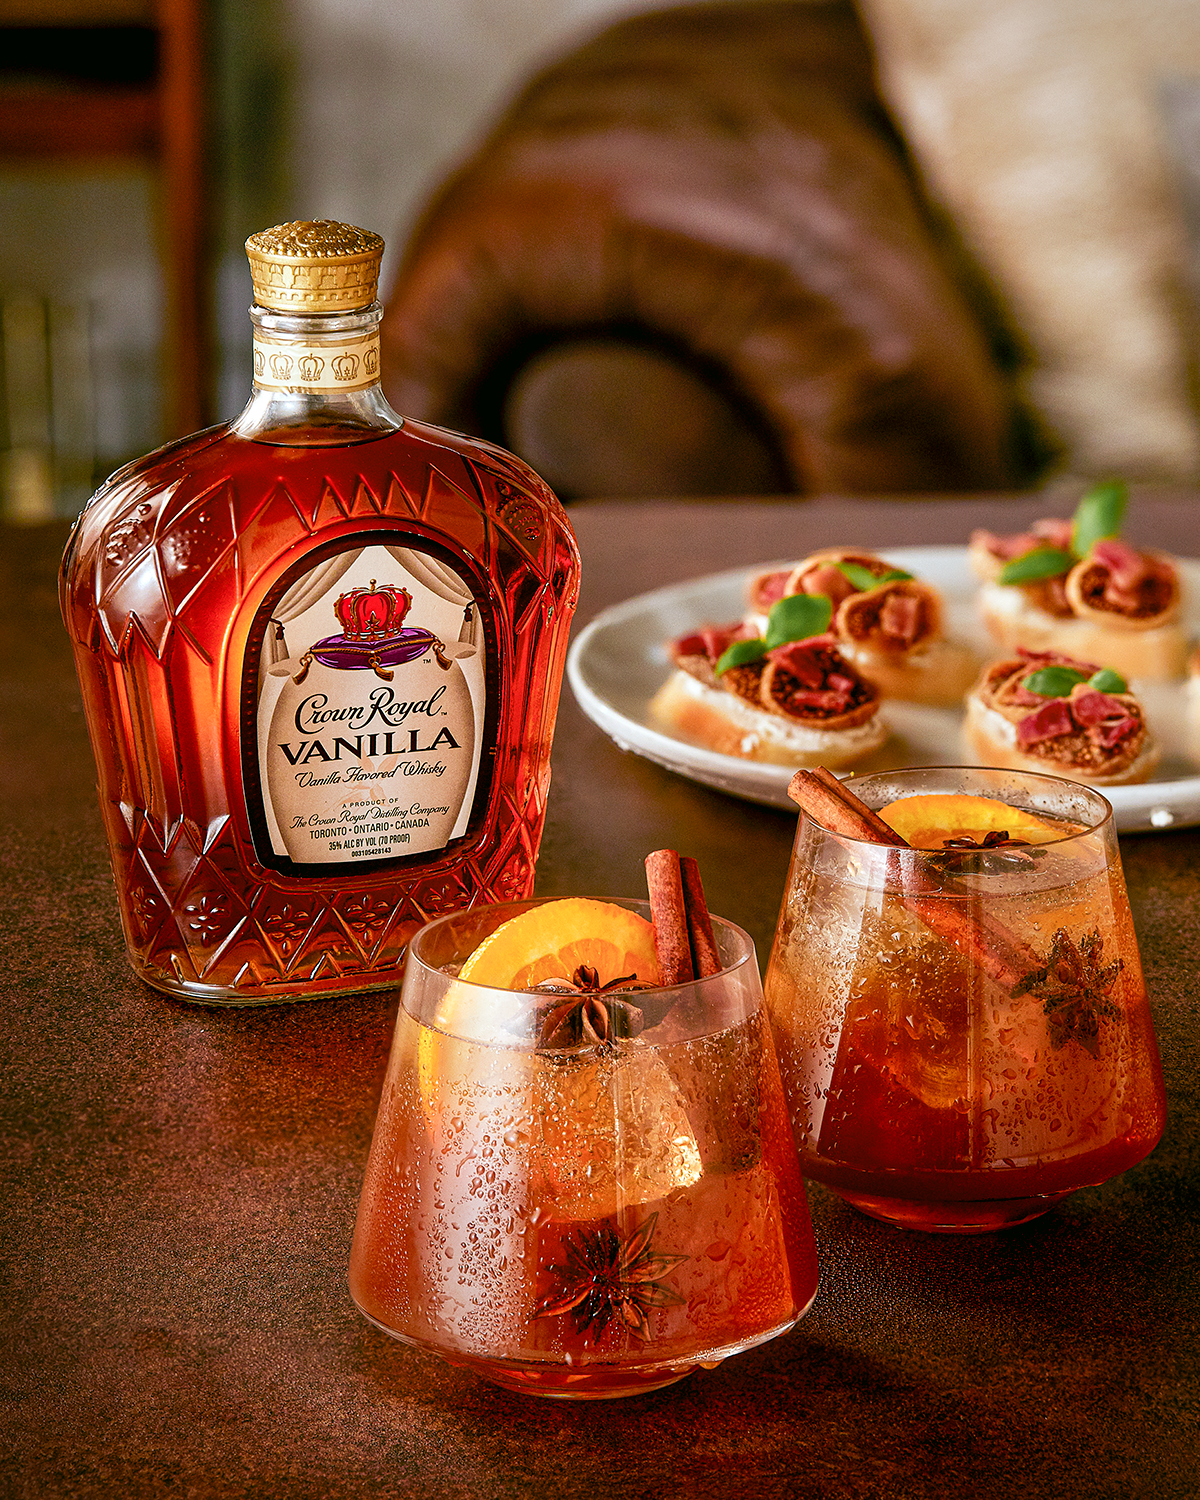 Crown Royal Vanilla Chai Old Fashioned Whisky Cocktail